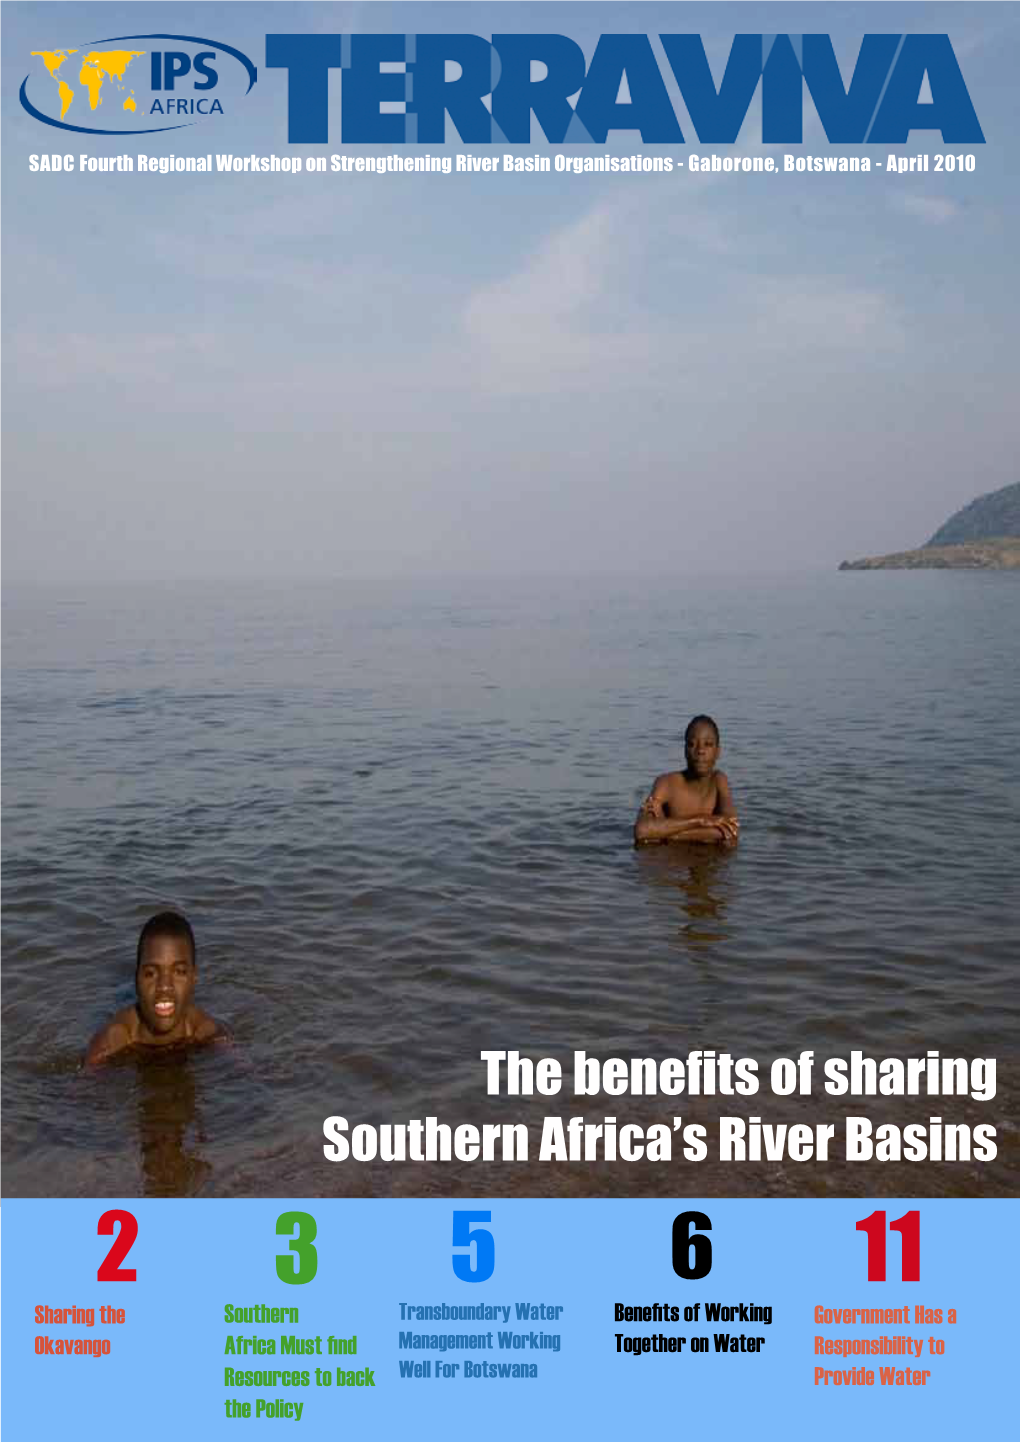 The Benefits of Sharing Southern Africa's River Basins